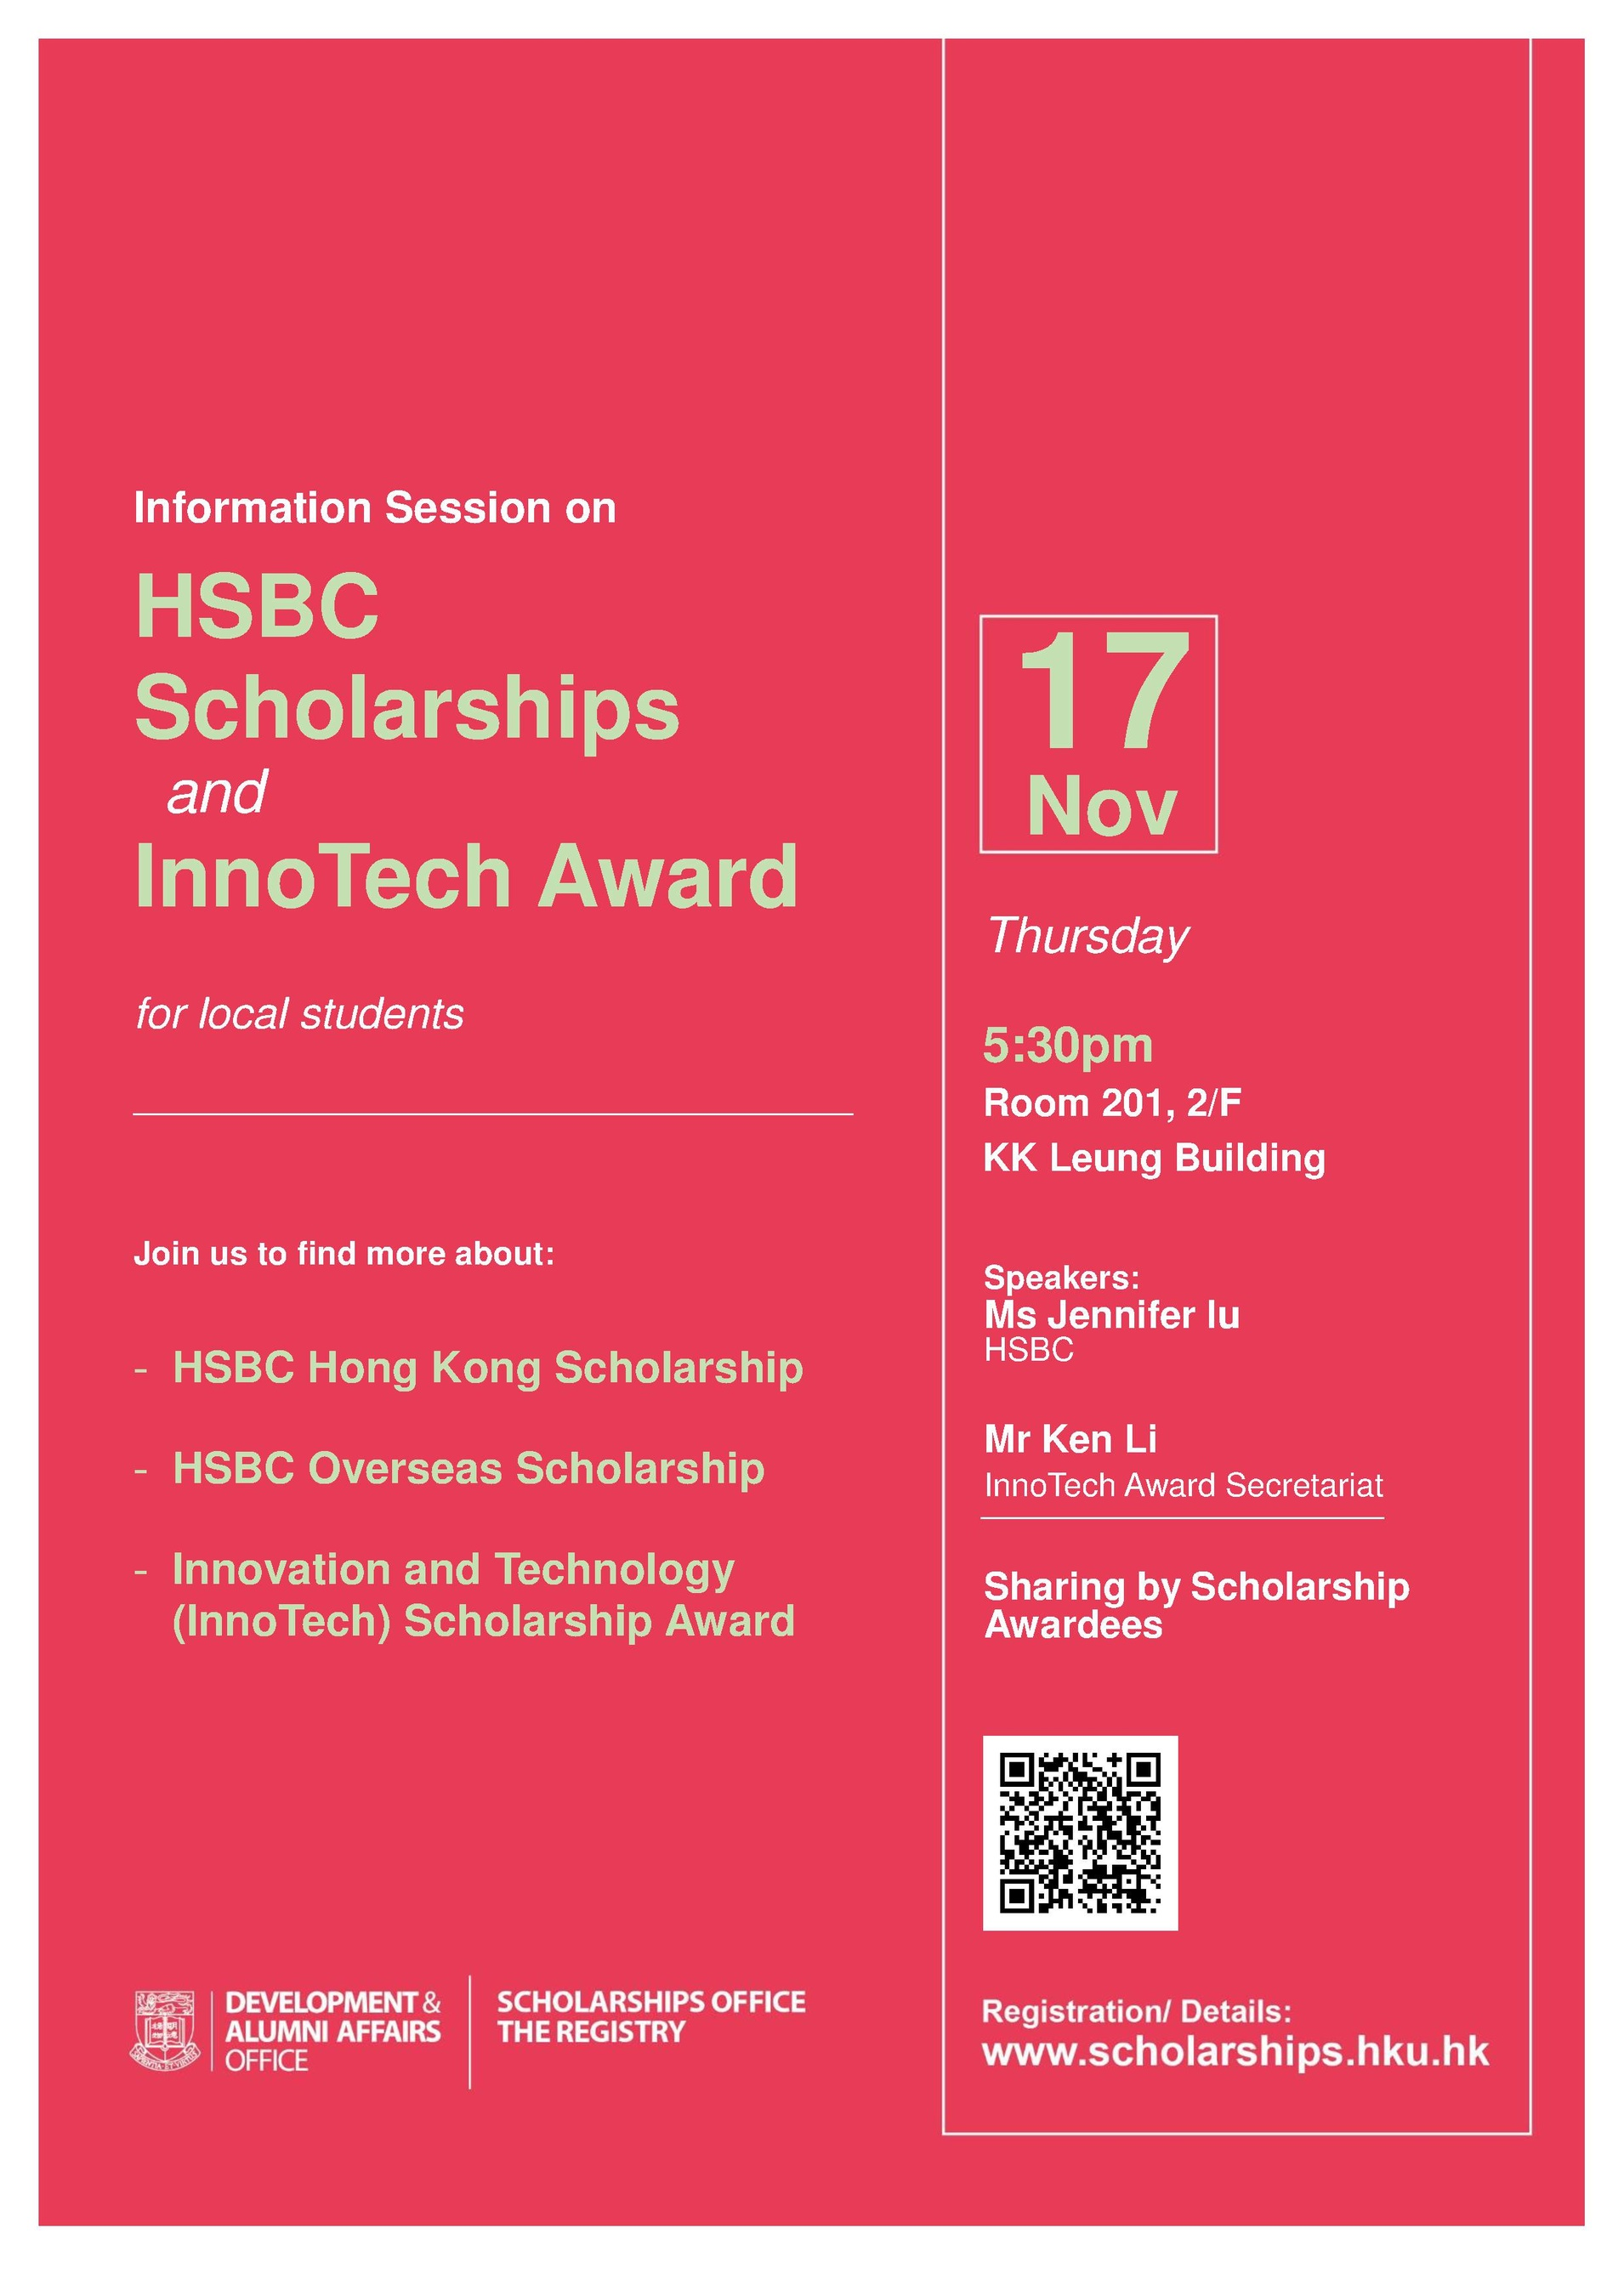 Information Session on HSBC Scholarships and InnoTech Award